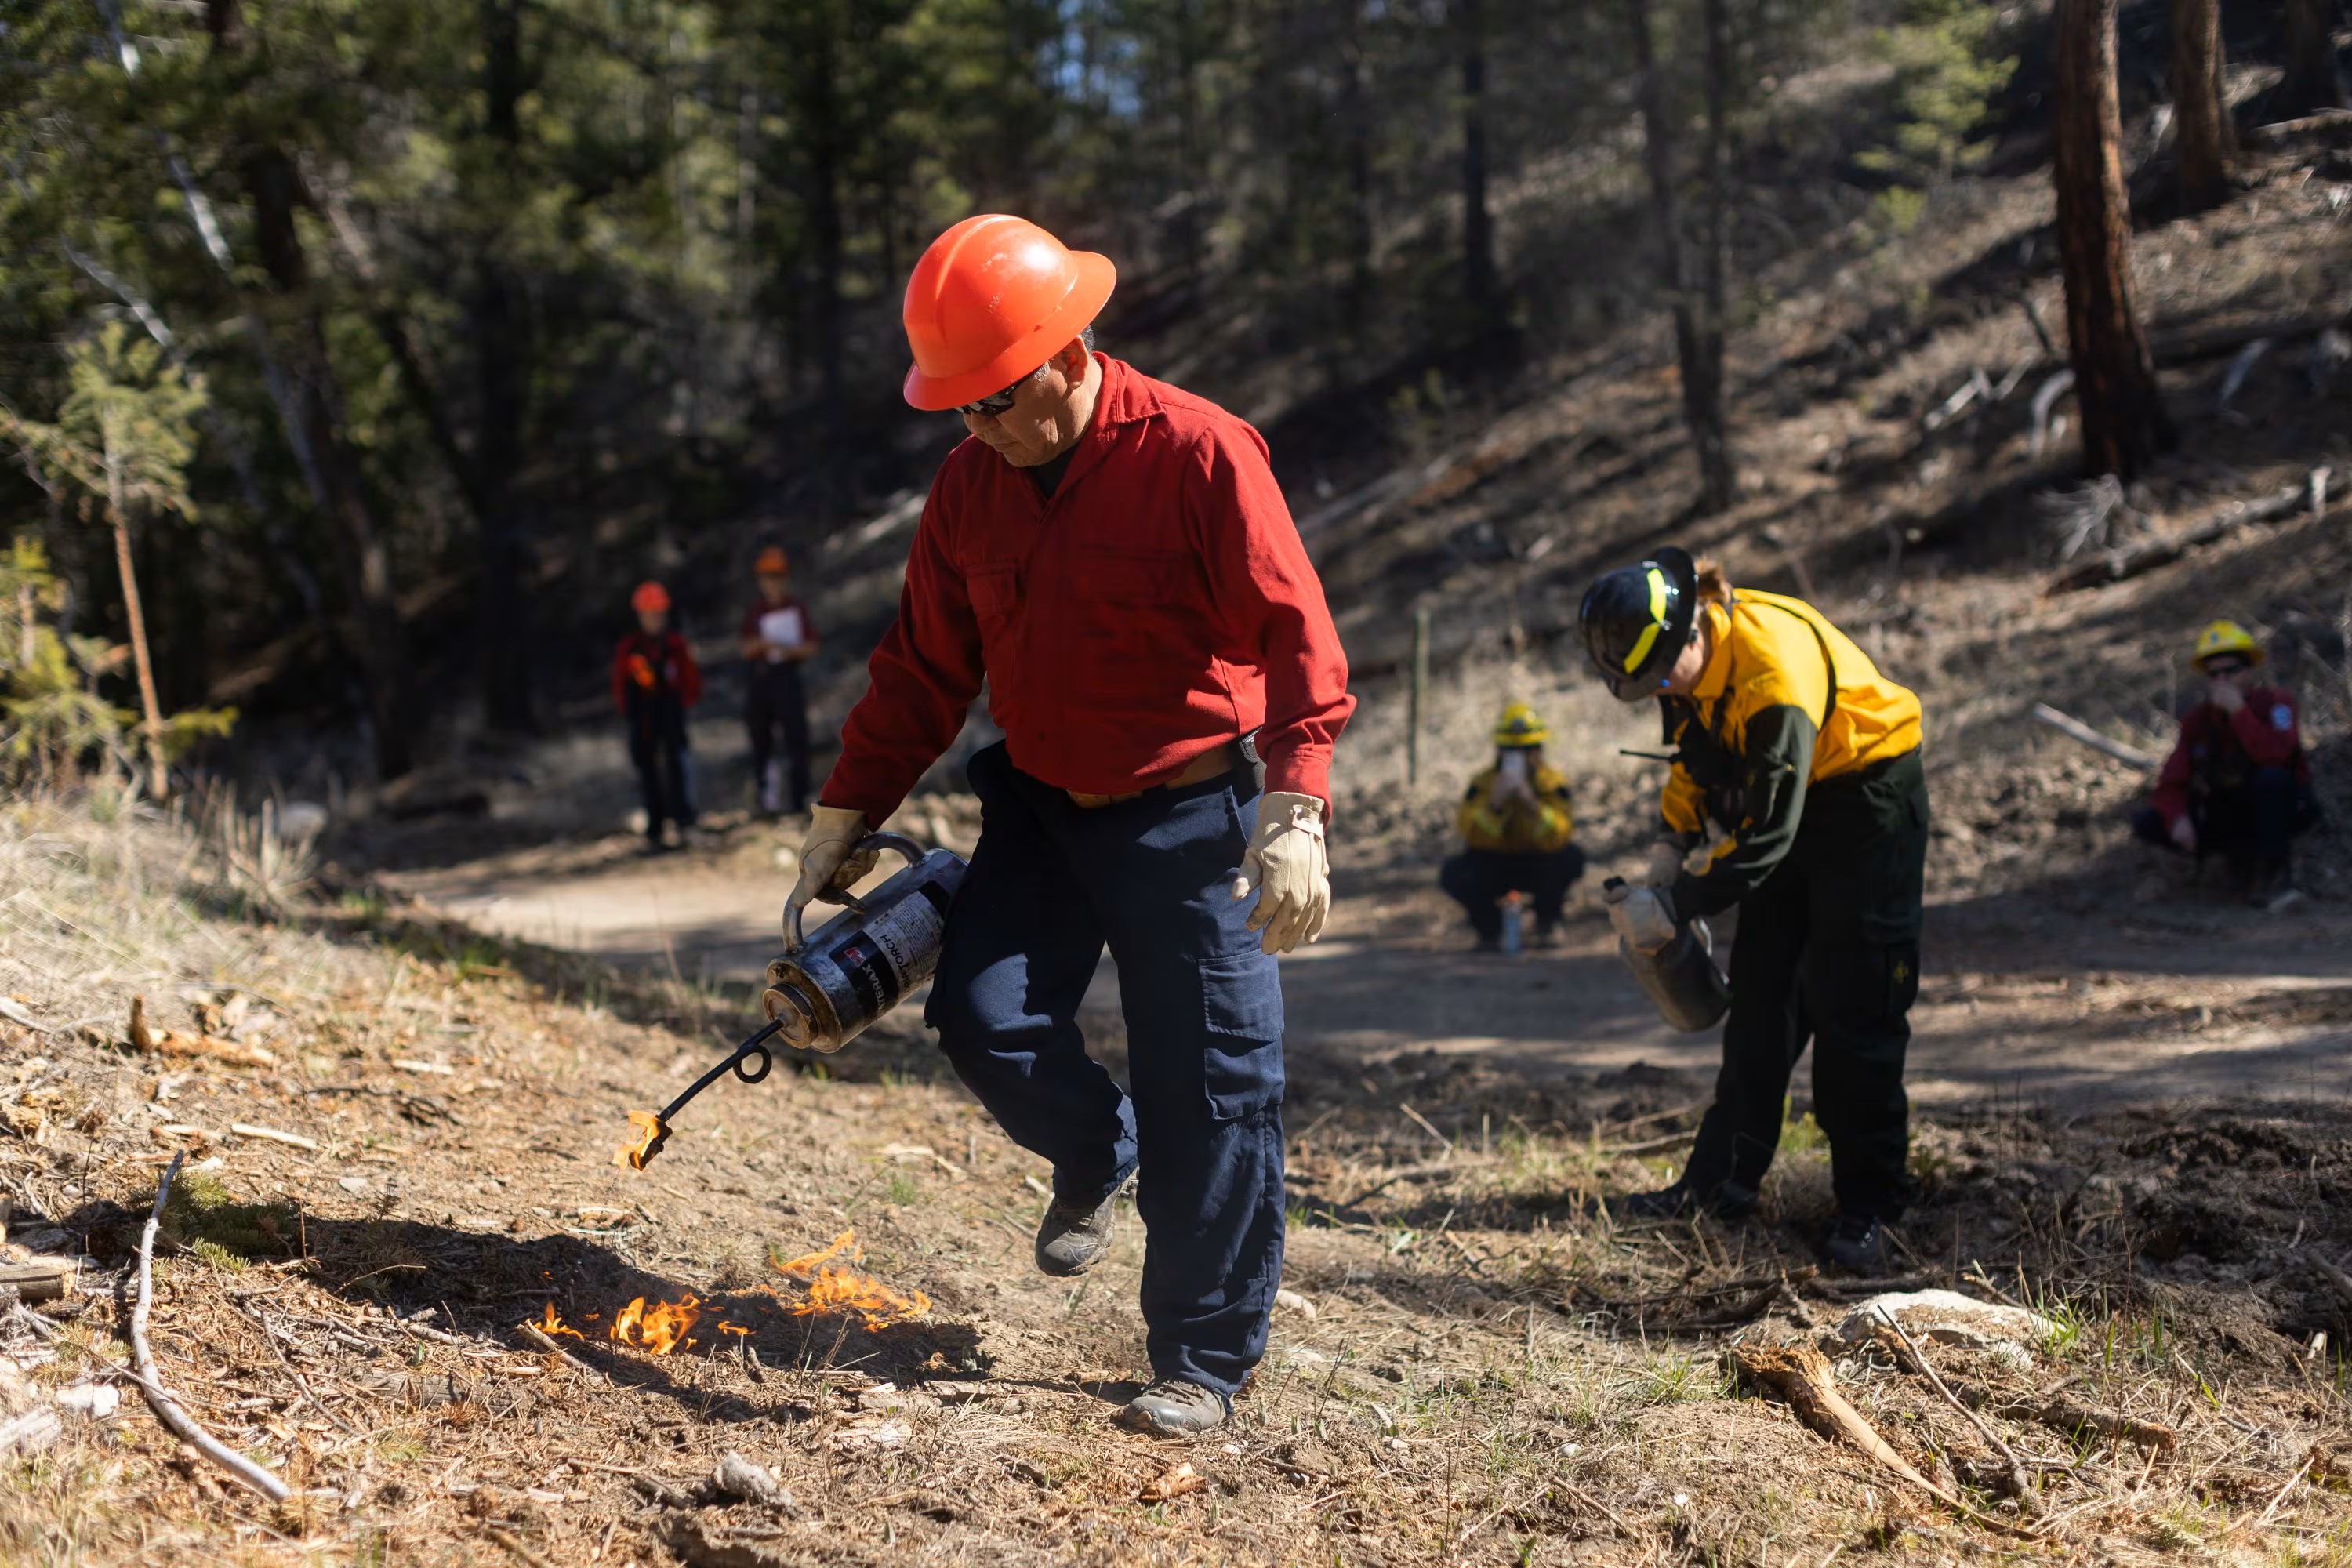 A person with an orange hard hat, red long-sleeved shirt, white gloves and blue pants holds a torch with a flame on the end as they light up a dry forest floor